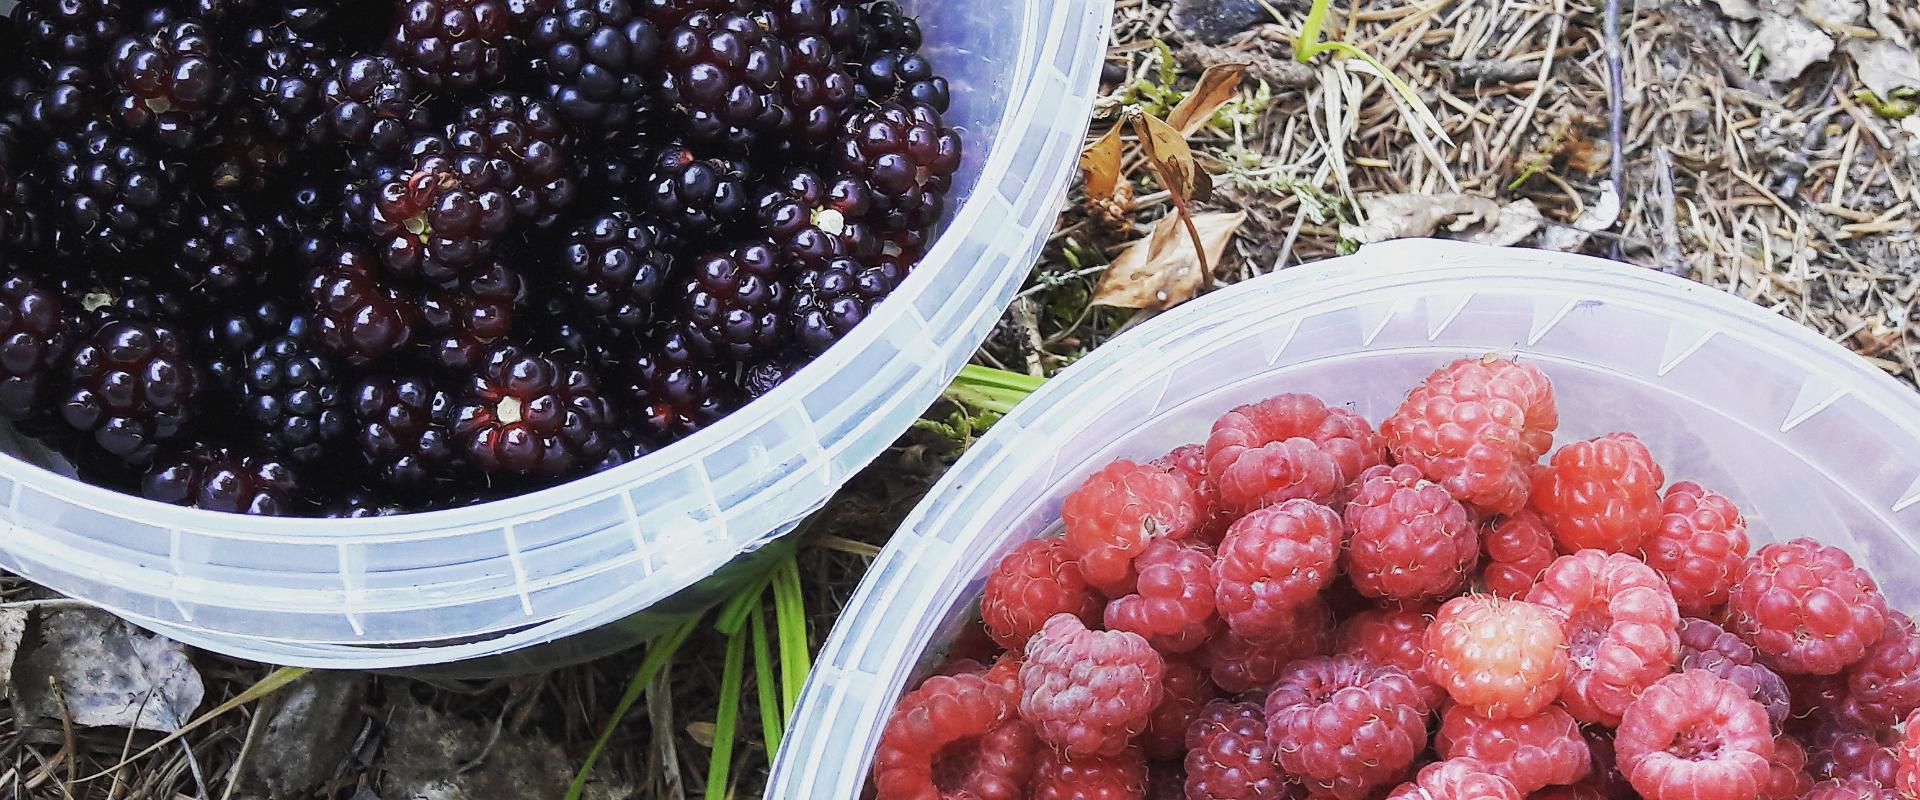 Nature Tours in Estonia – berry and mushroom picking trips in the Peipsiveere Nature Reserve